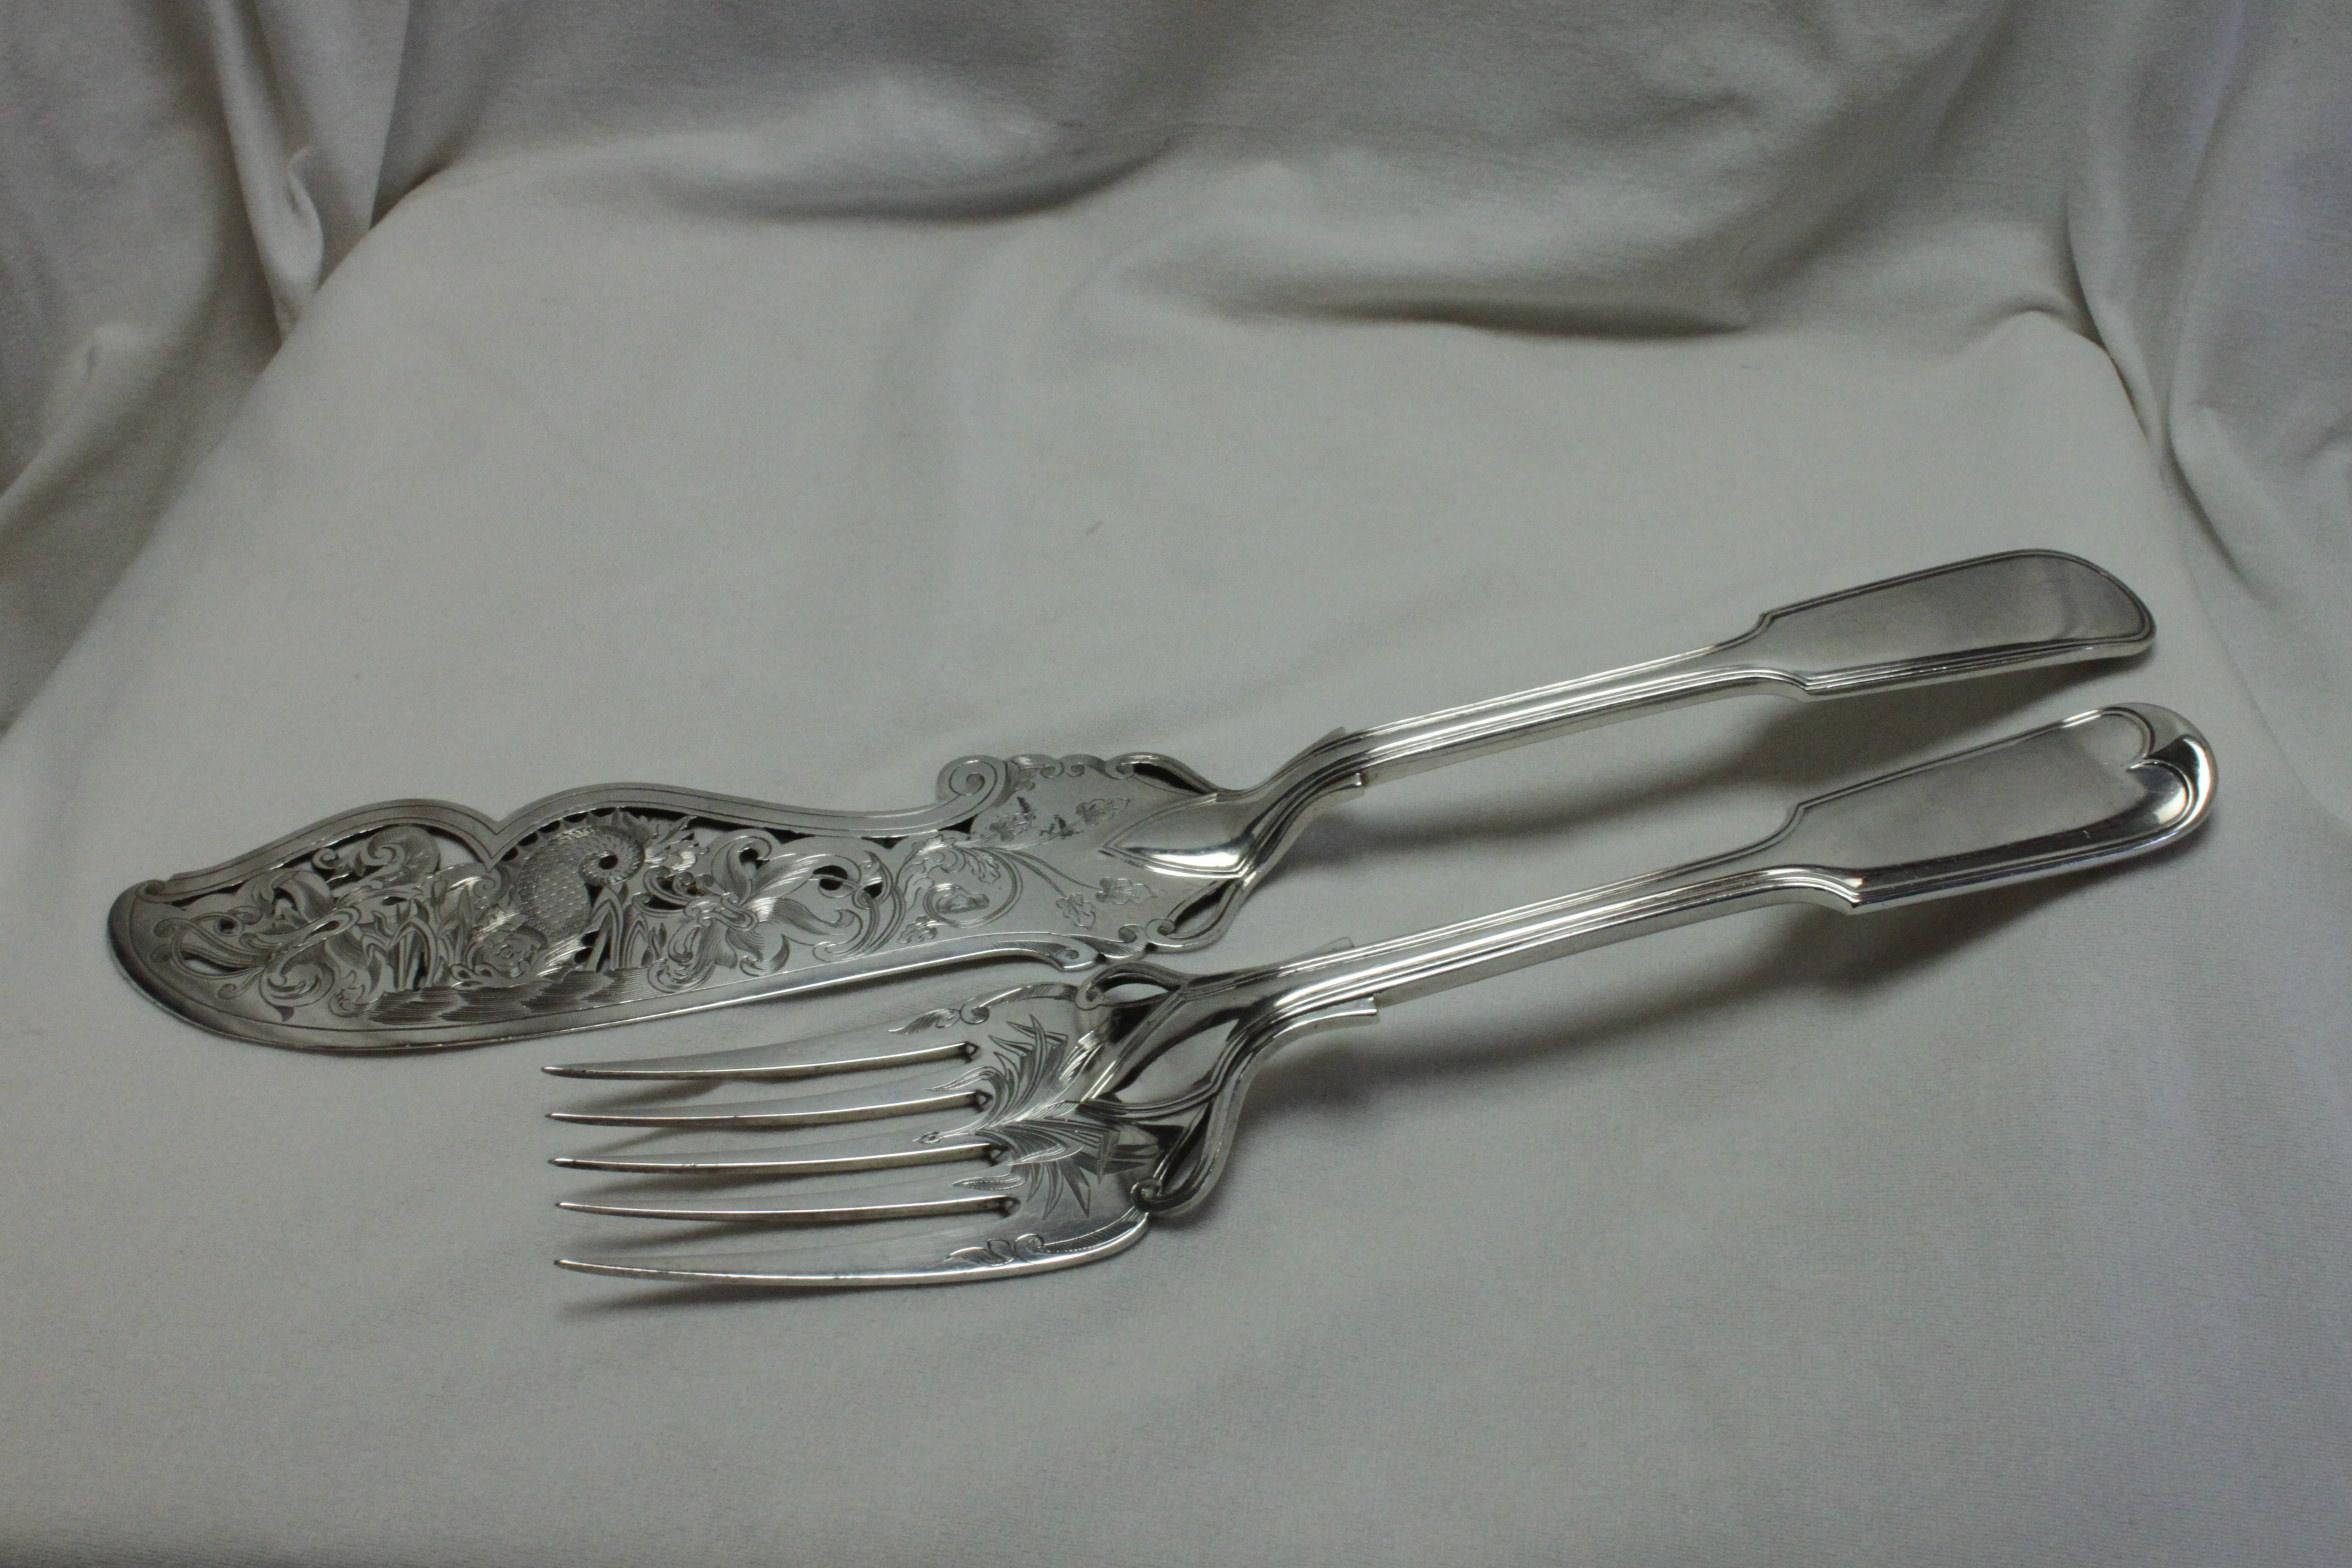 This pair of silver plated pierced and engraved fish servers were made by Elkington & Co. They are of good quality and quite weighty. They are decorated with very ornate and very detailed engraving, more so on the fish slice which features a dolphin